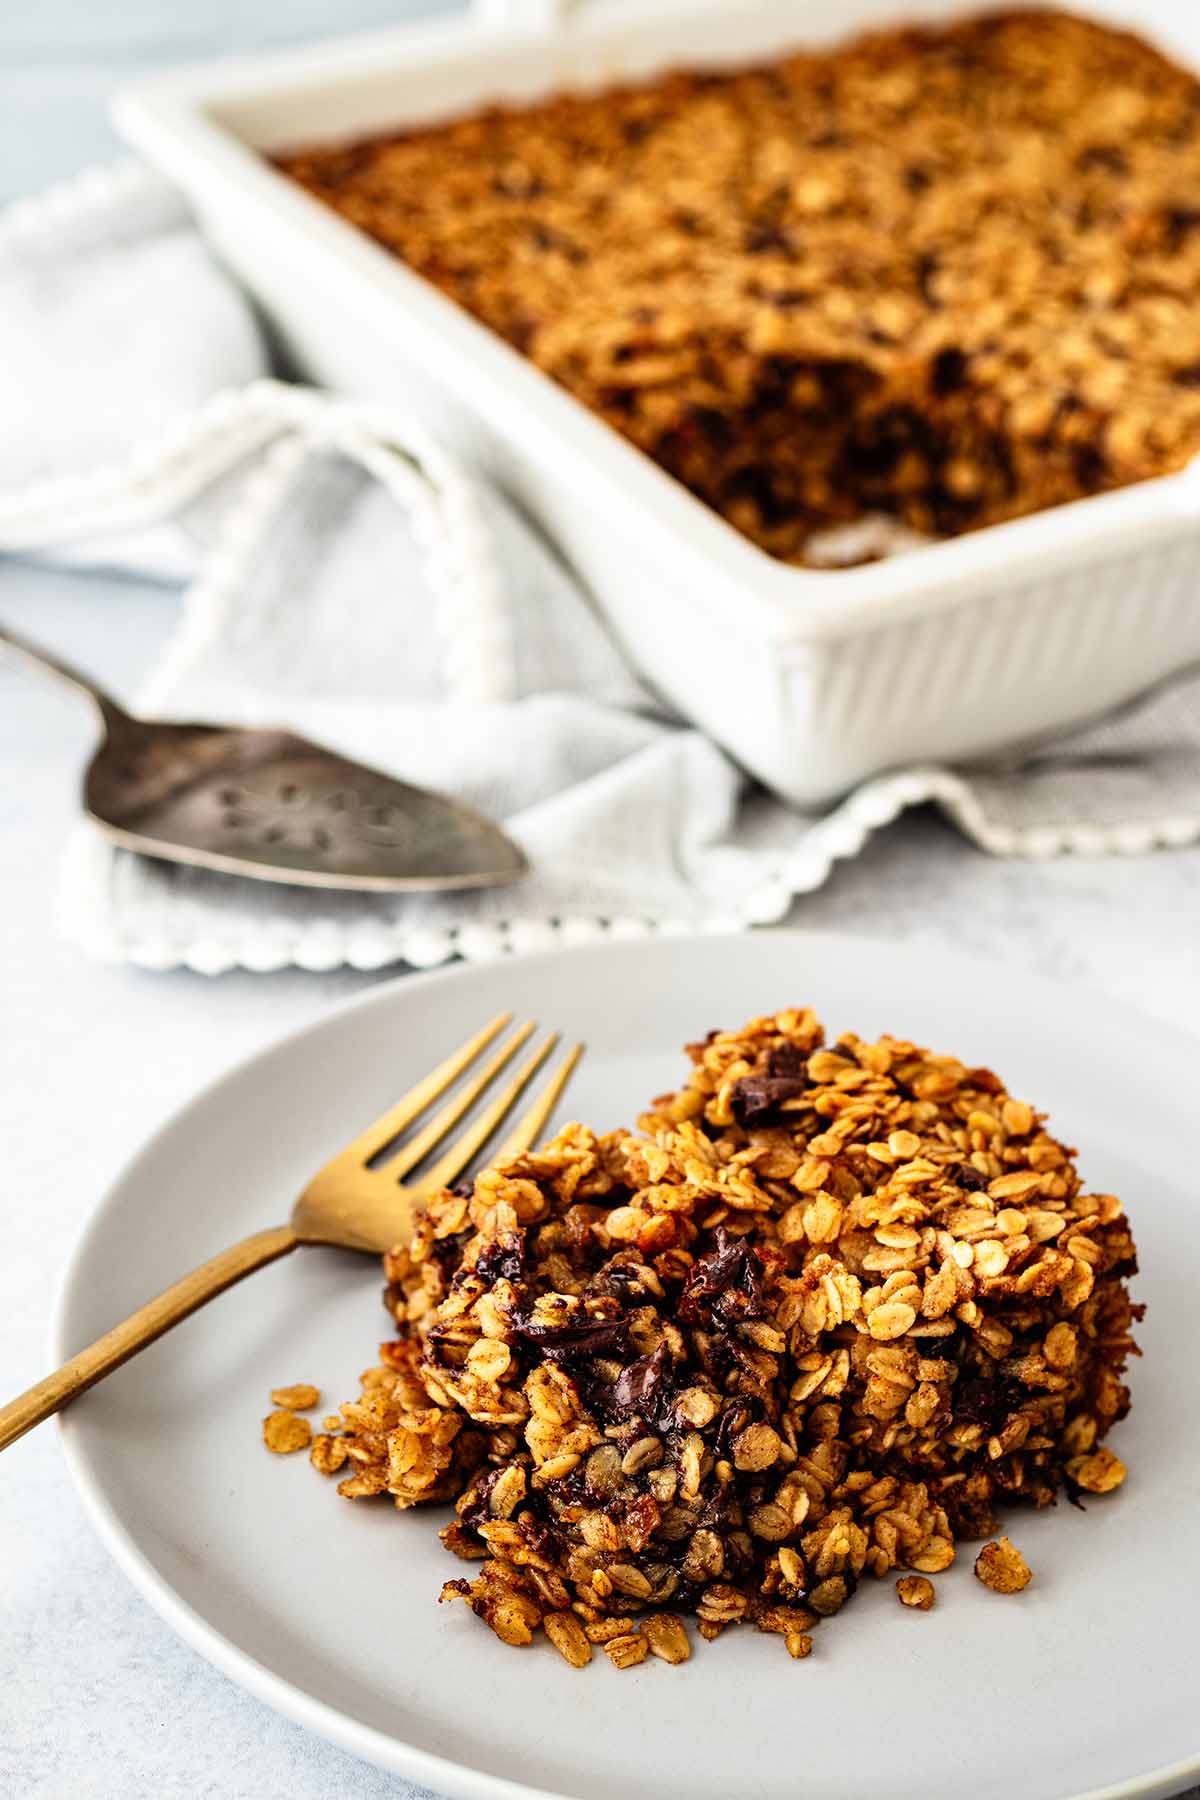 Serving of chocolate chip baked oatmeal on a light gray plate with a gold fork.